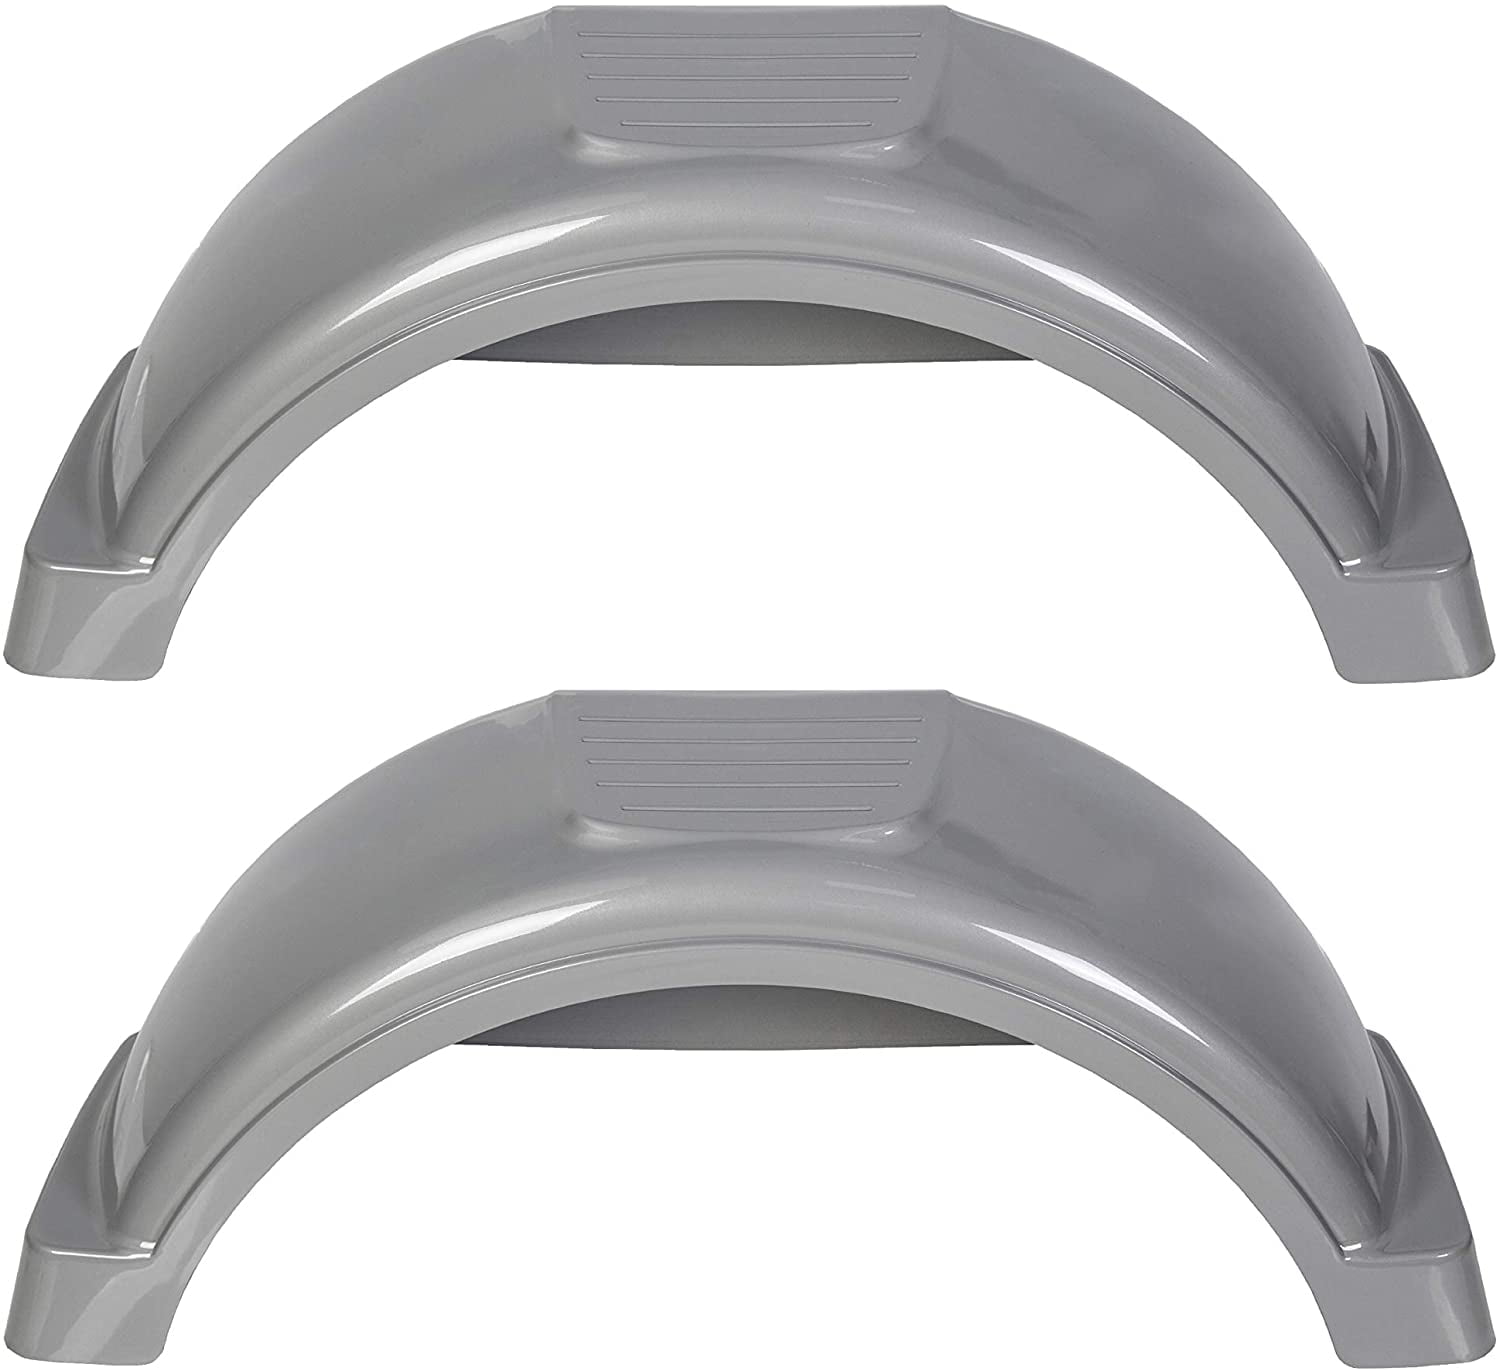 Black/White ECOTRIC Tandem Trailer Fender Skirt for RVs Campers and Trailers 